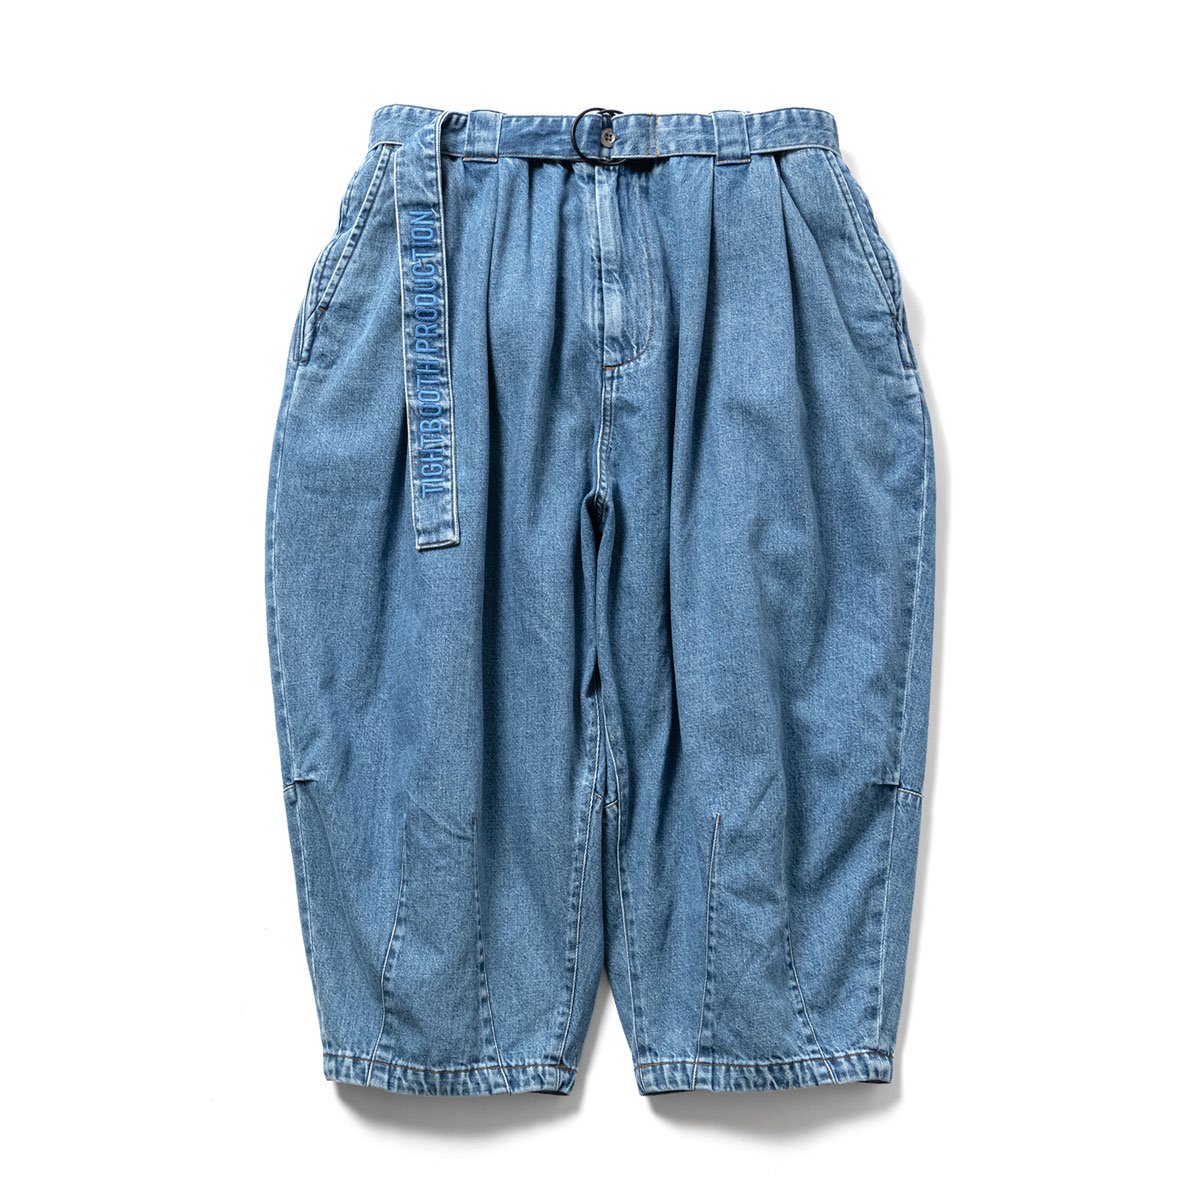 DENIM CROPPED PANTS - TIGHTBOOTH PRODUCTION